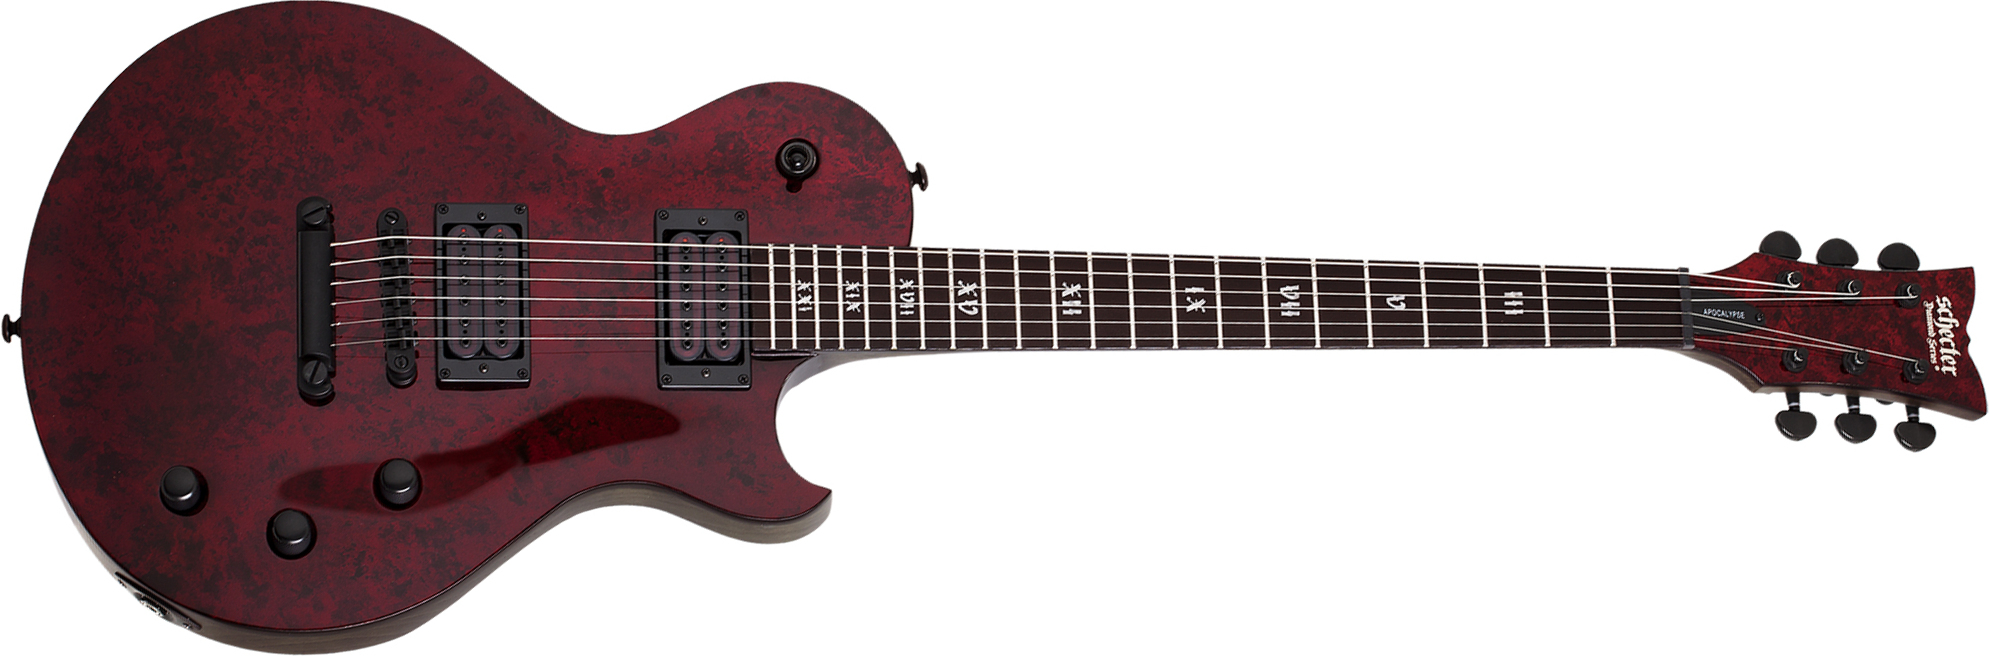 Schecter Solo-ii Apocalypse 2h Ht Eb - Red Reign - Single cut electric guitar - Main picture